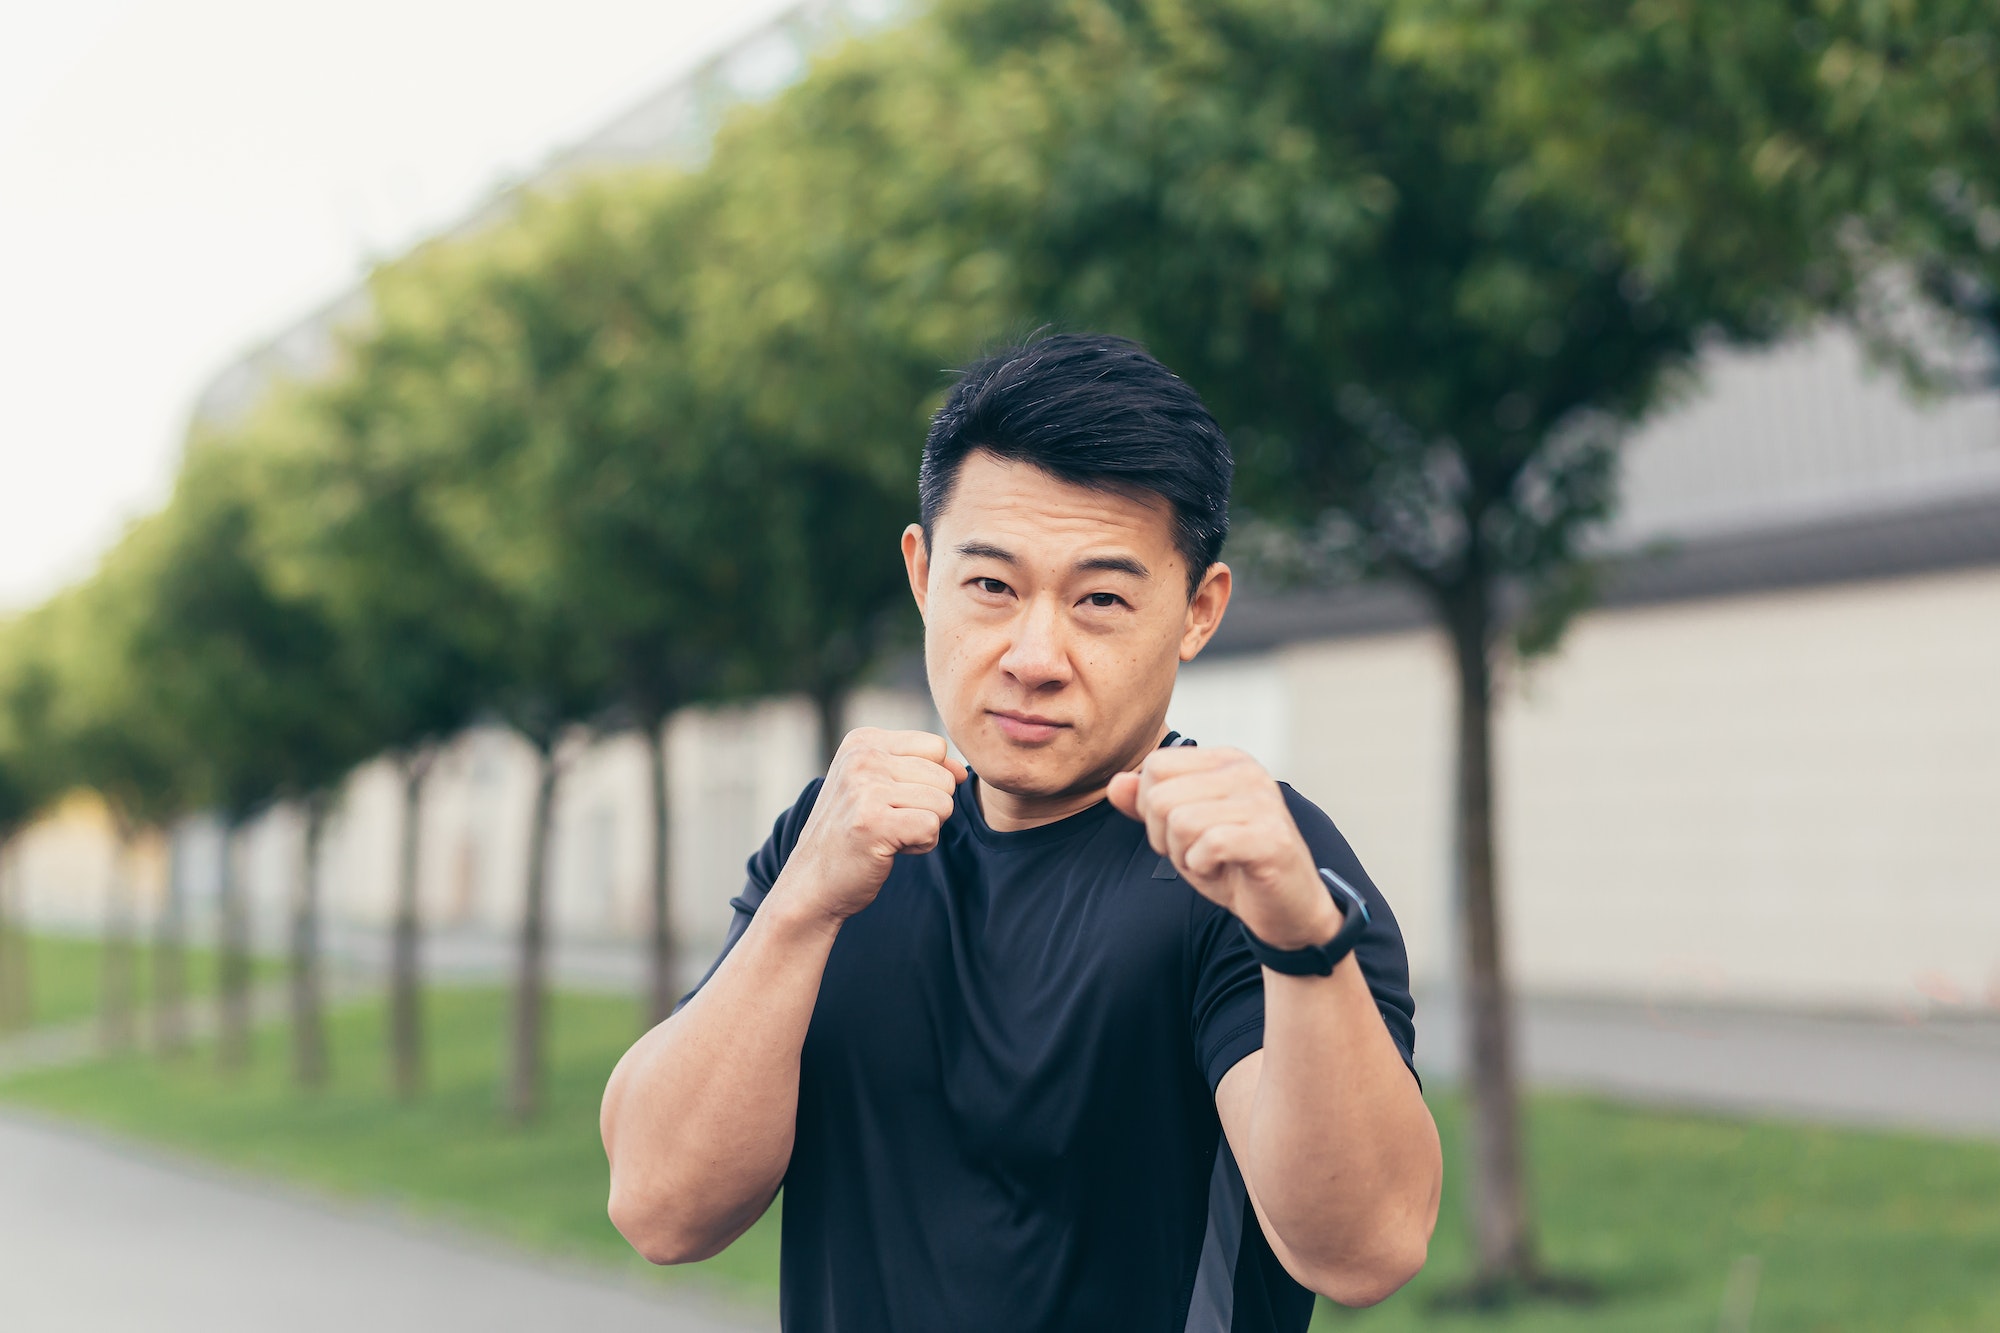 Male asian athlete demonstrates boxing rack during morning jogging and fitness